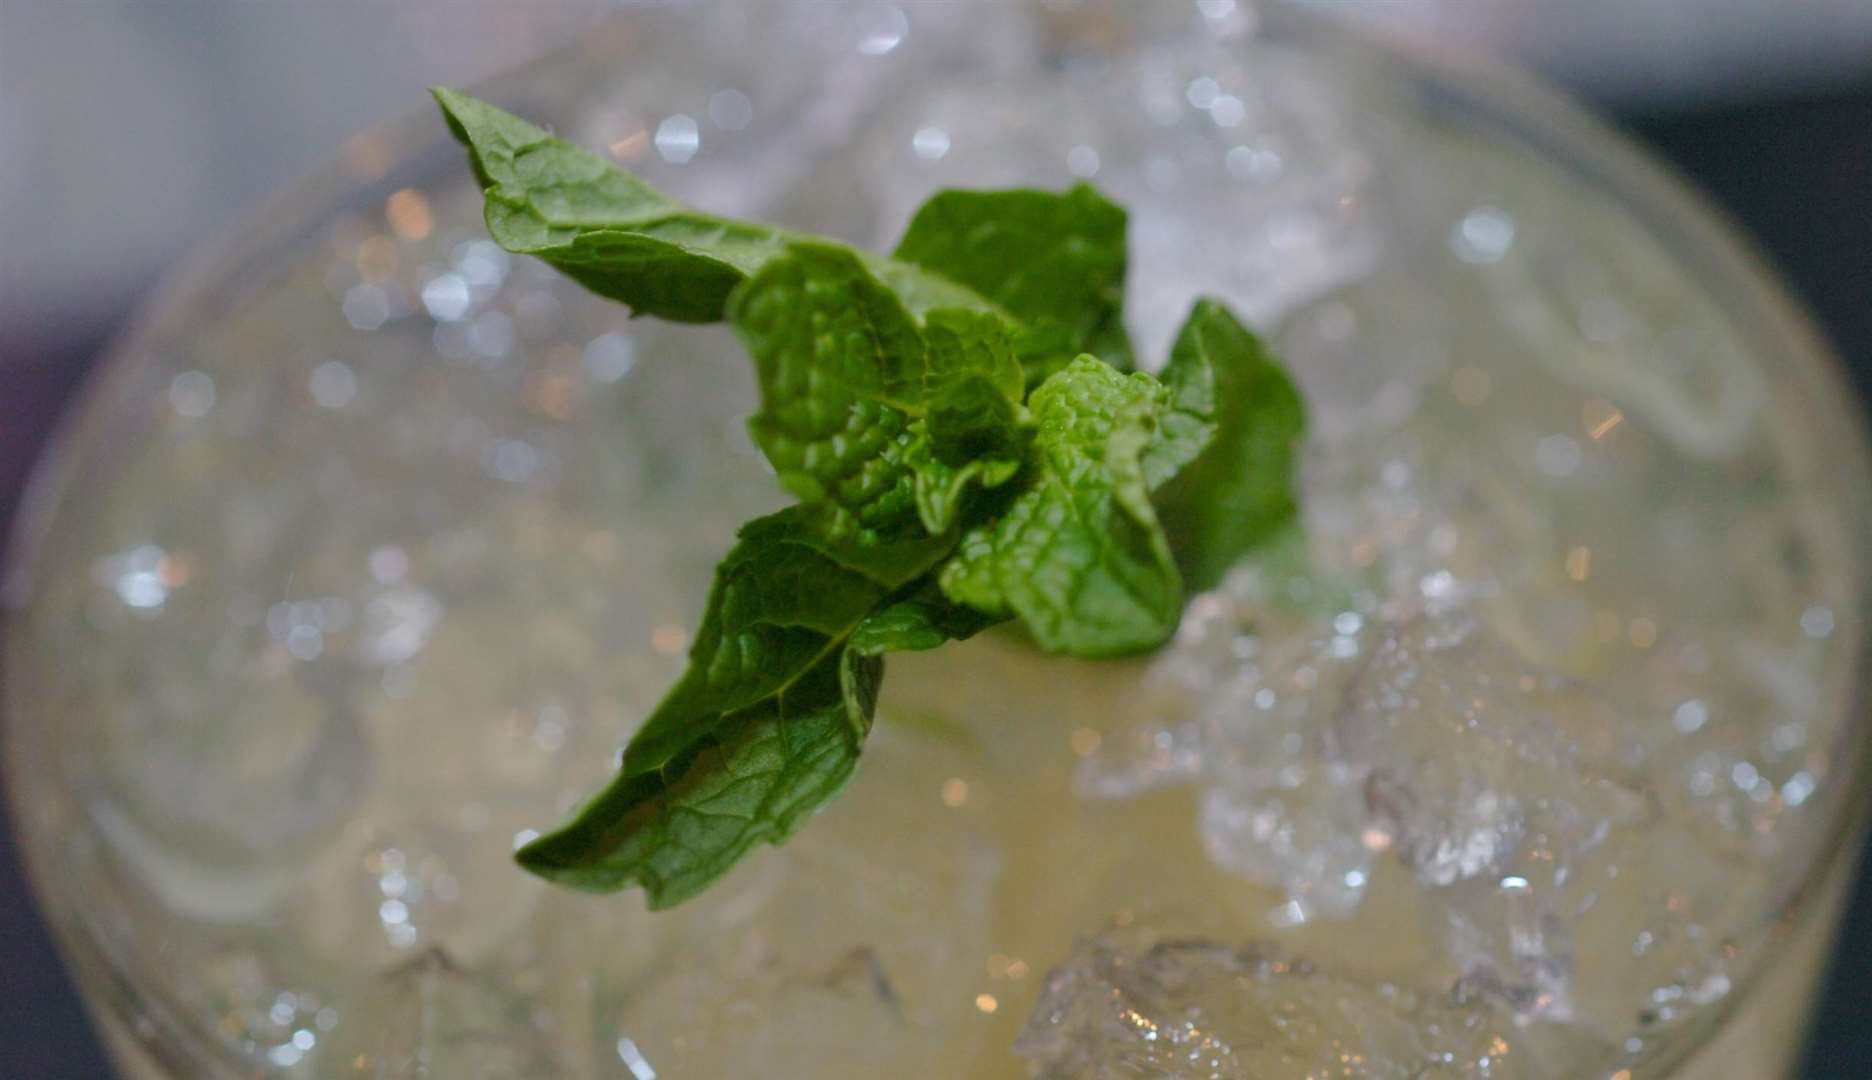 Mojitos made with vodka are a popular drink for many in the summer